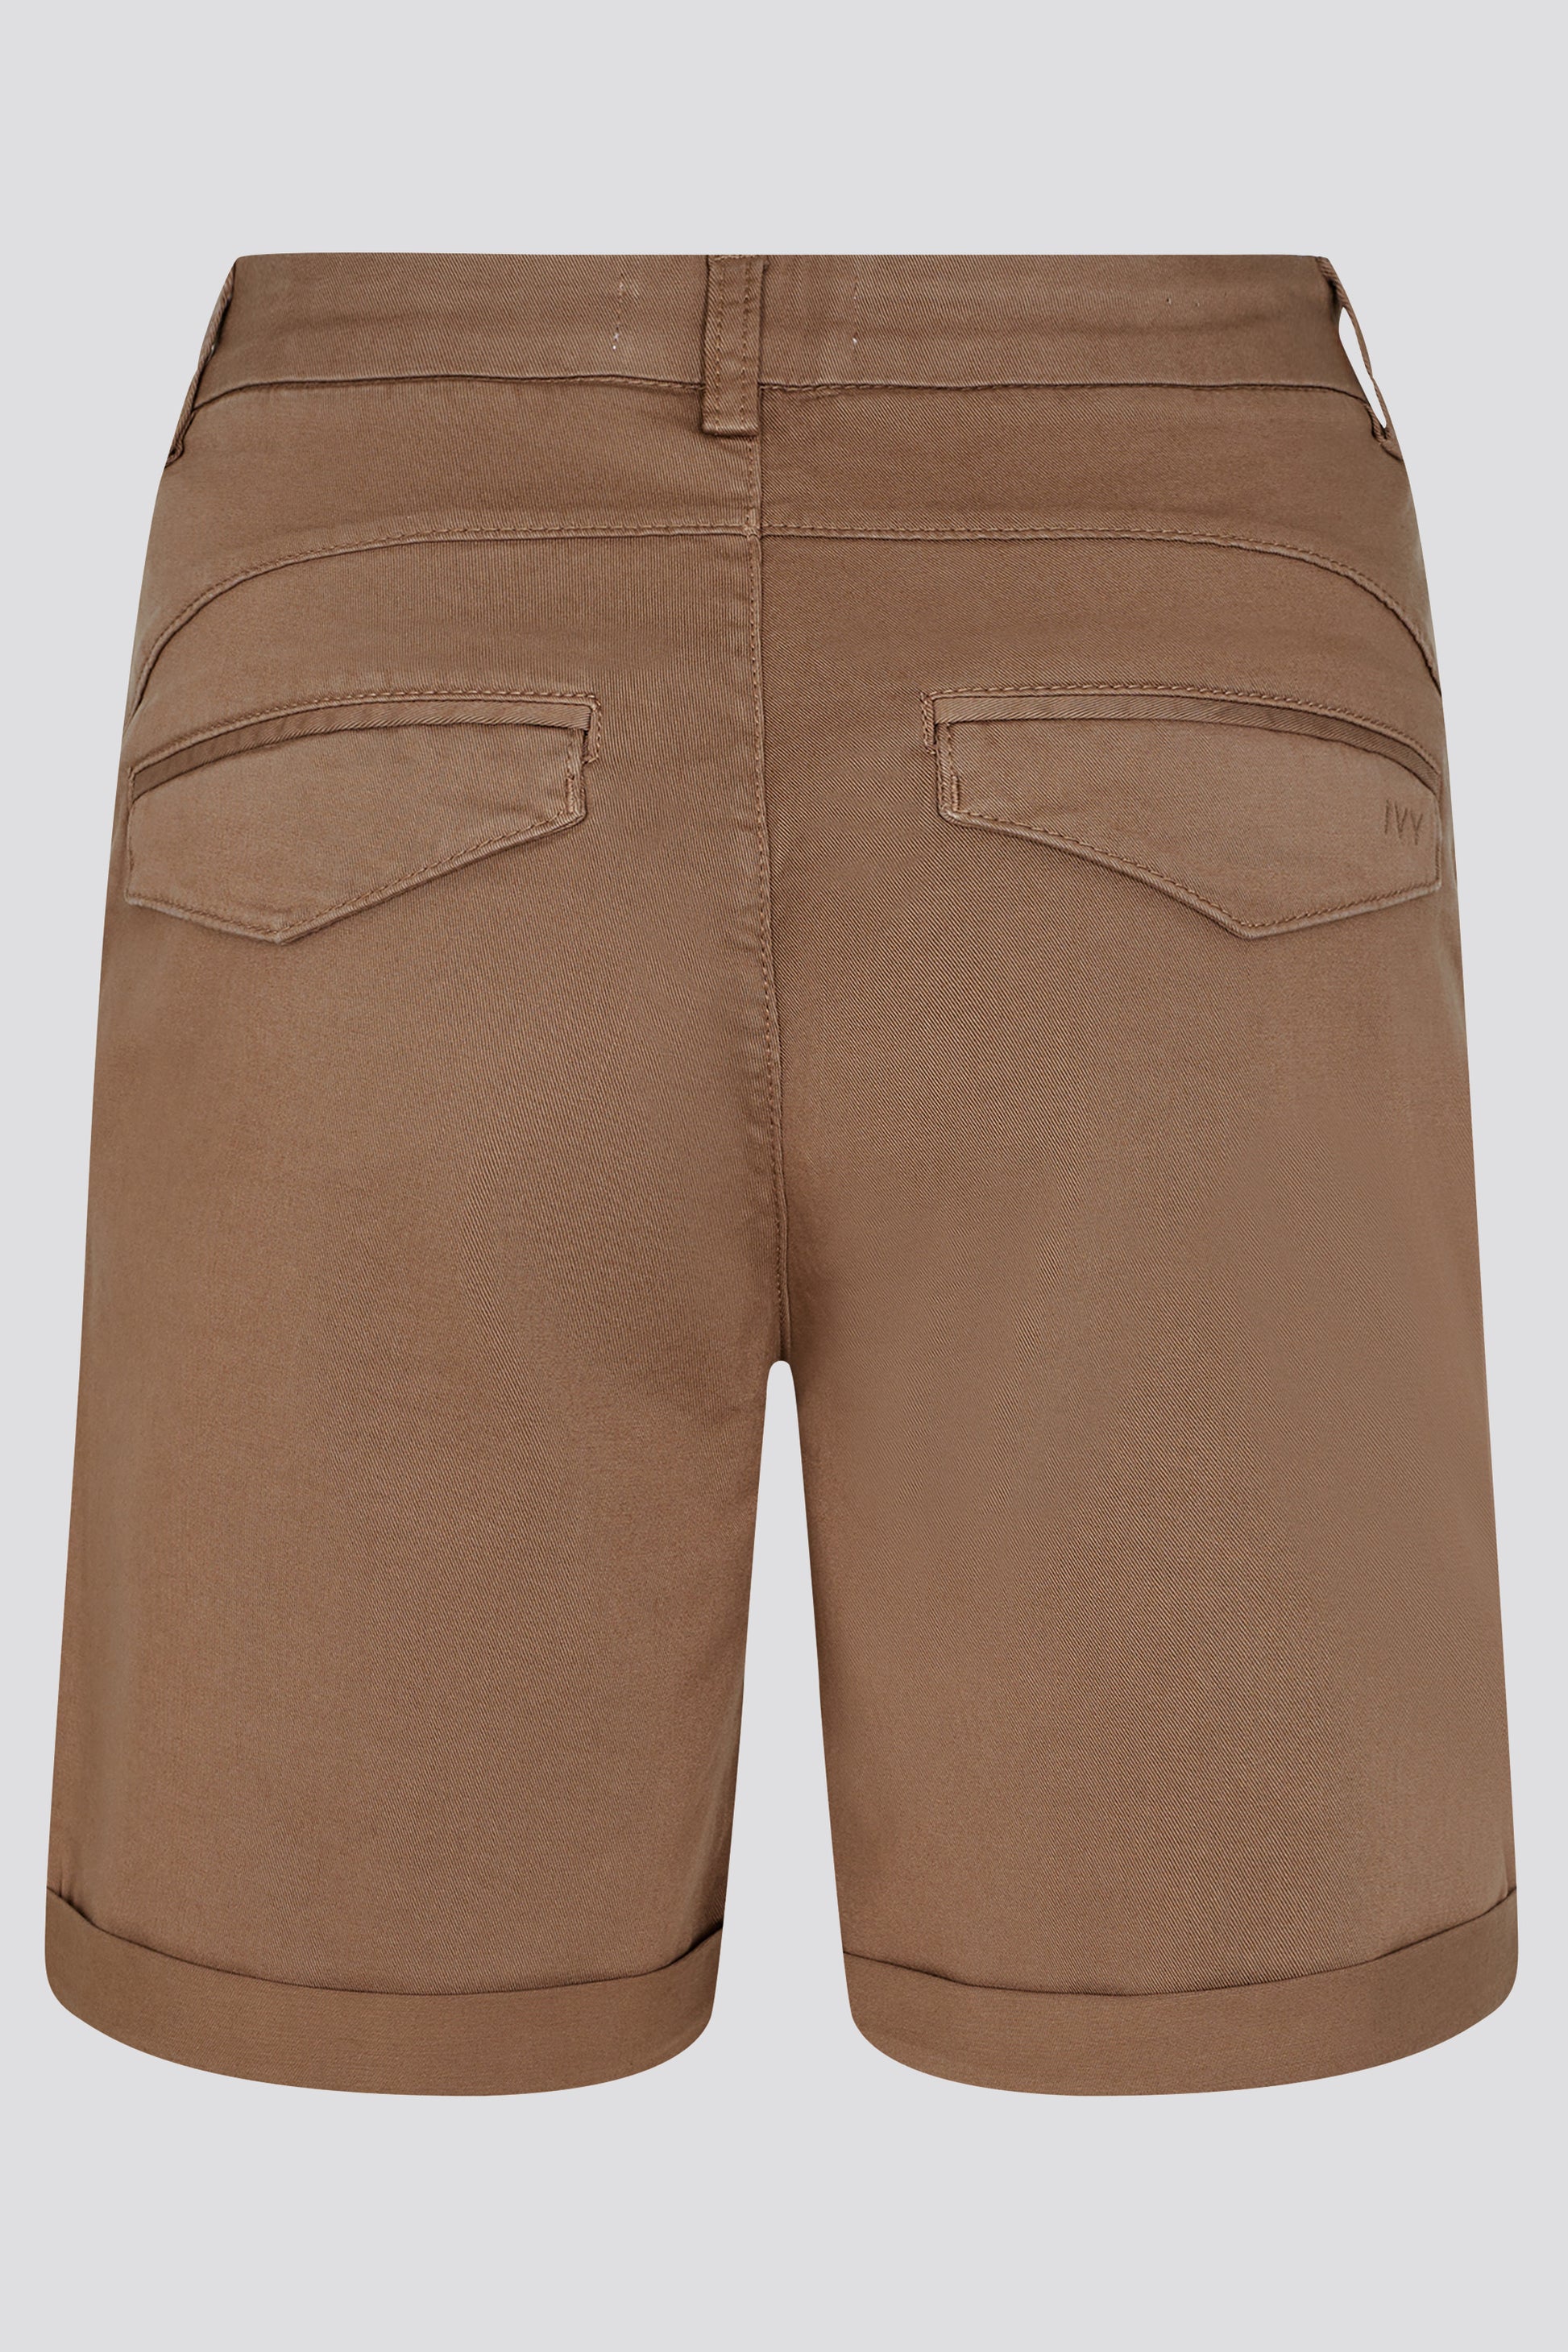 IVY Copenhagen IVY-Karmey Chino Shorts Jeans & Pants 753 Cool Taupe